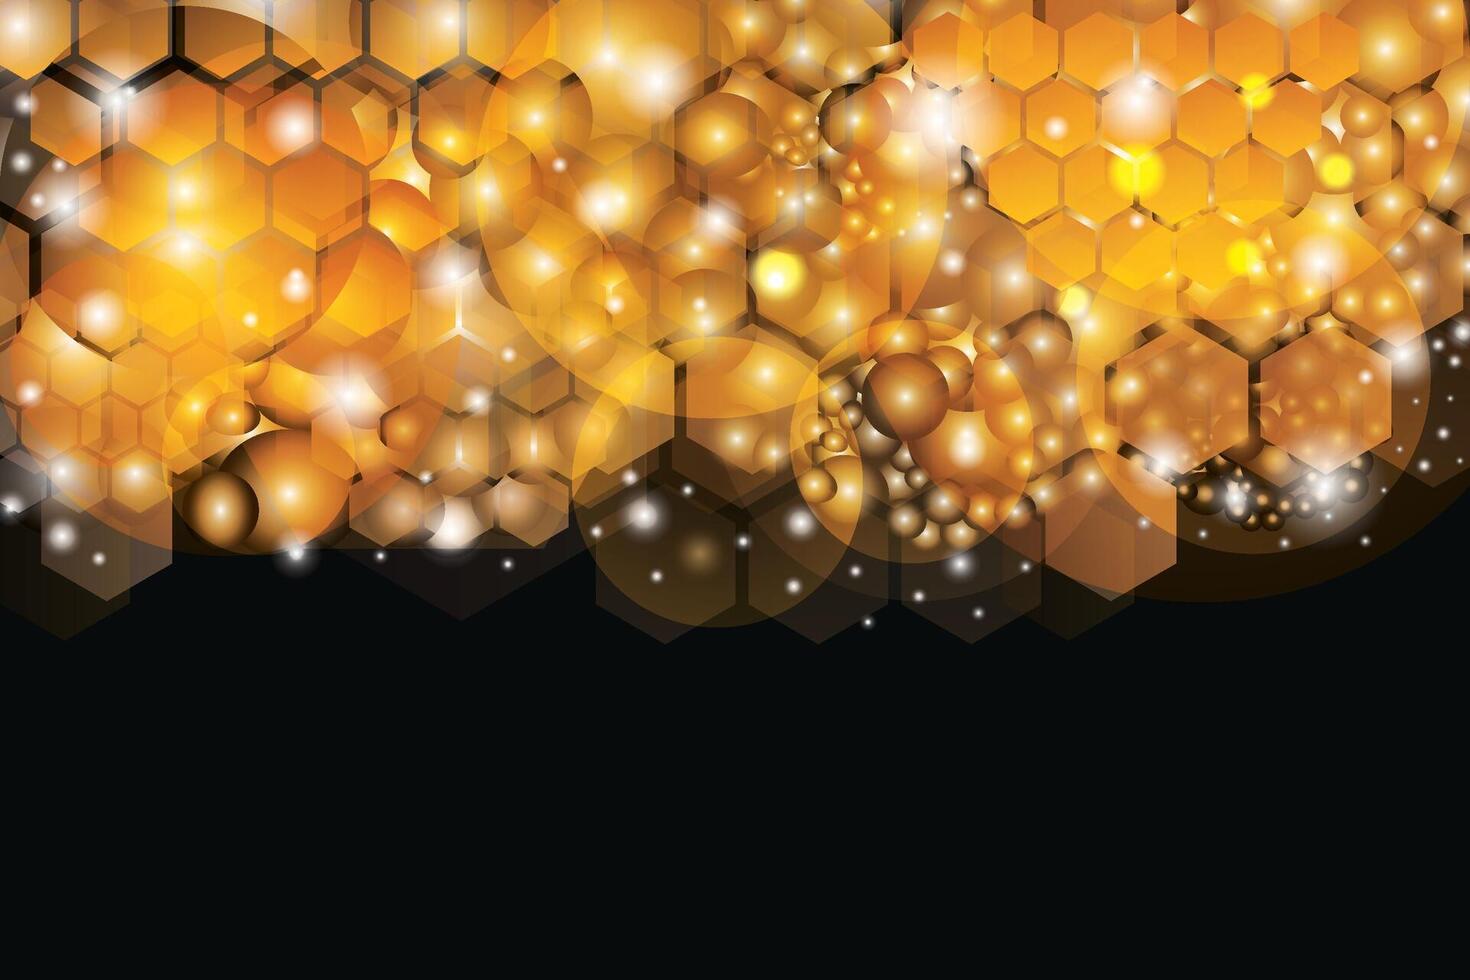 abstract background with golden honeycomb shapes, hexagonal background with golden color pattern,   gold geometric 3d hexagon vector wallpaper and web banner background design